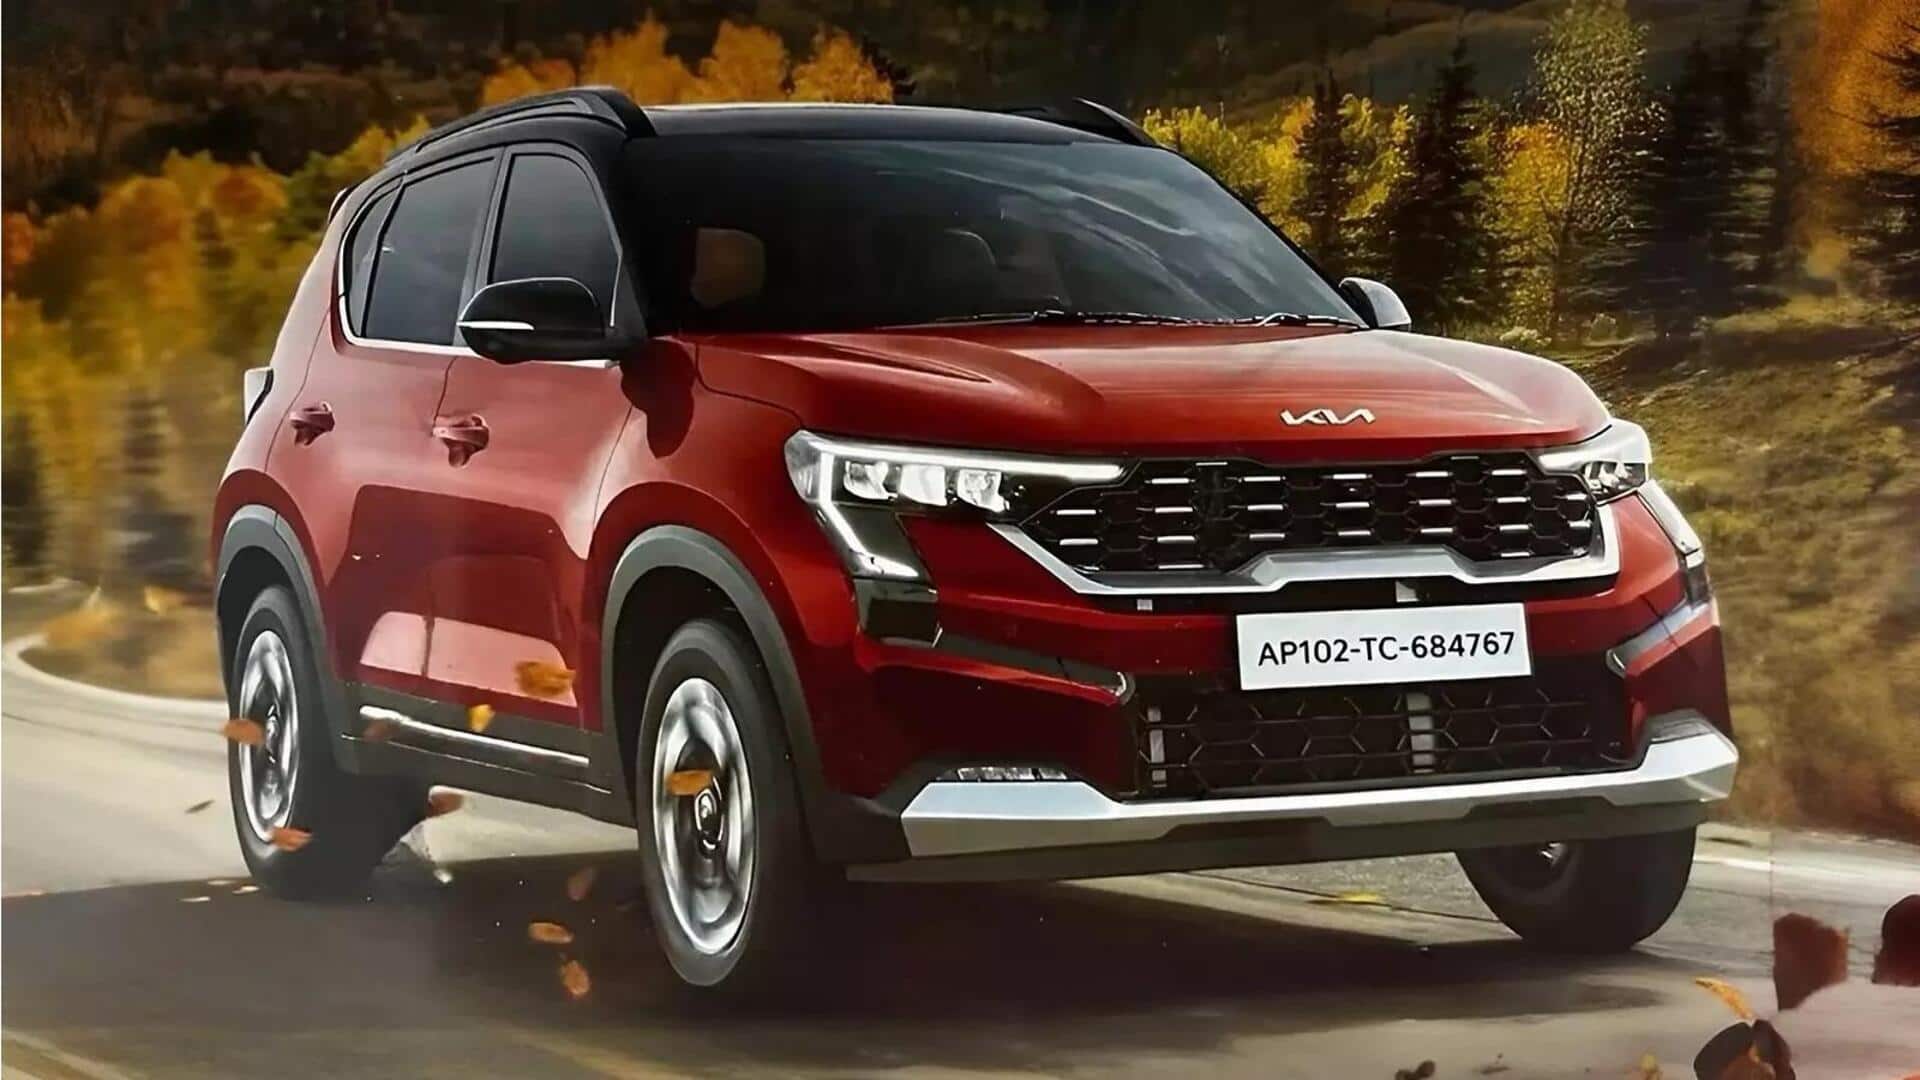 Kia Sonet debuts with refreshed design and segment-leading safety features